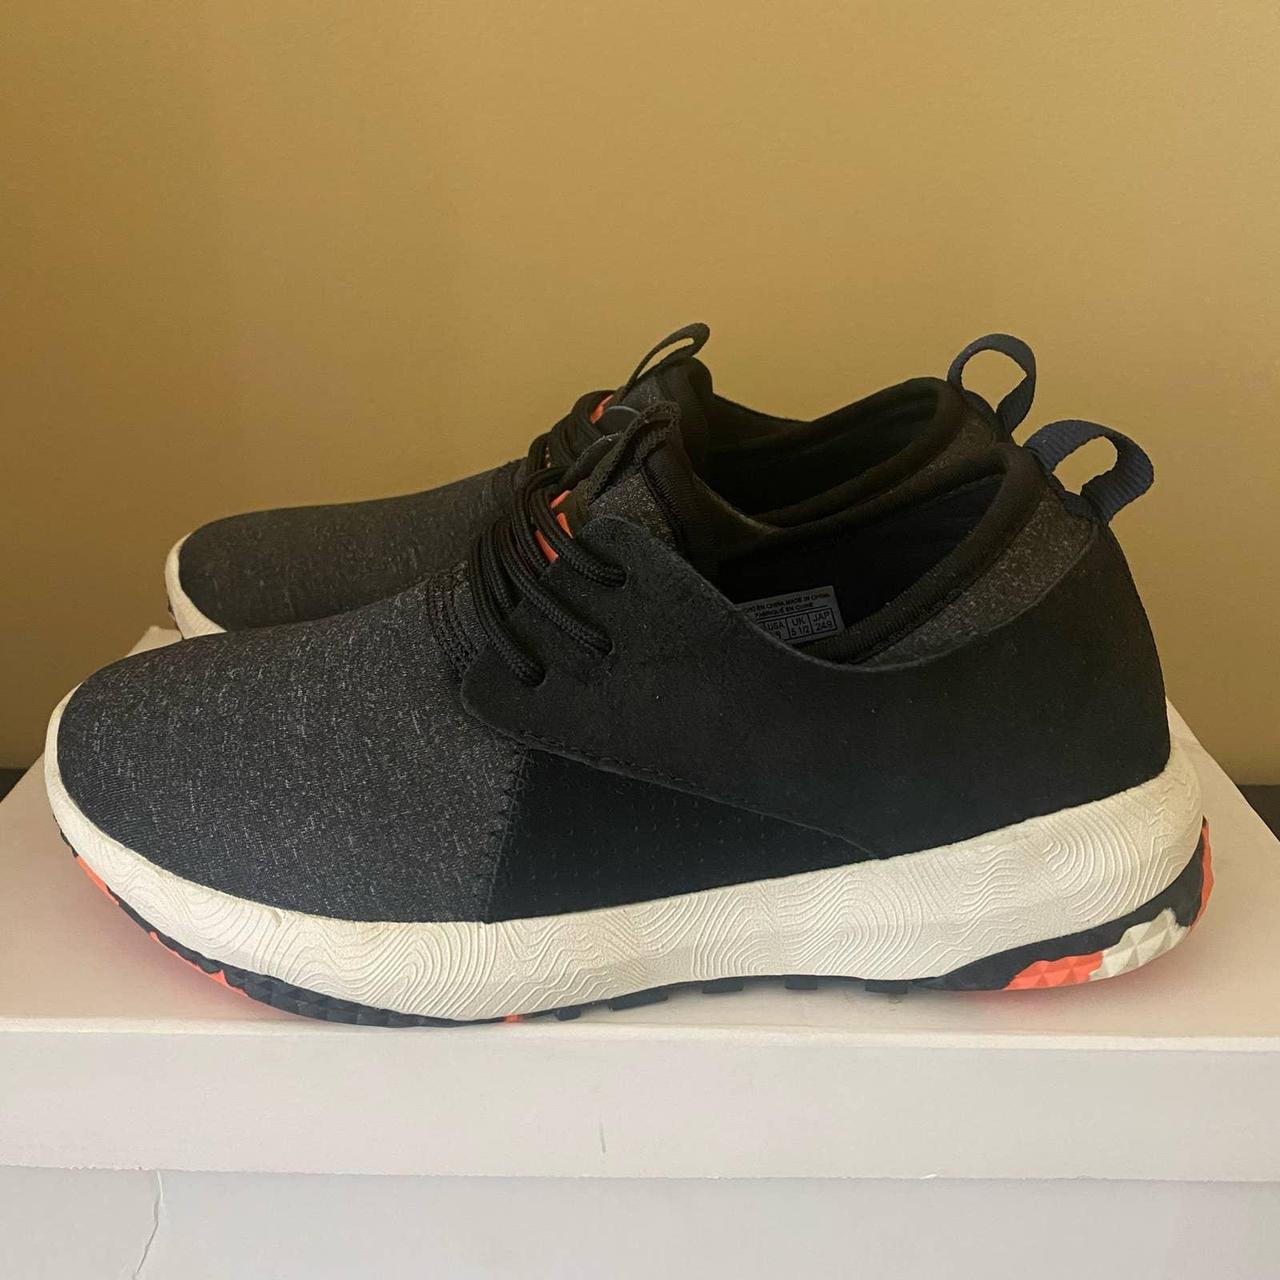 Cool TM Women's Black and Grey Trainers